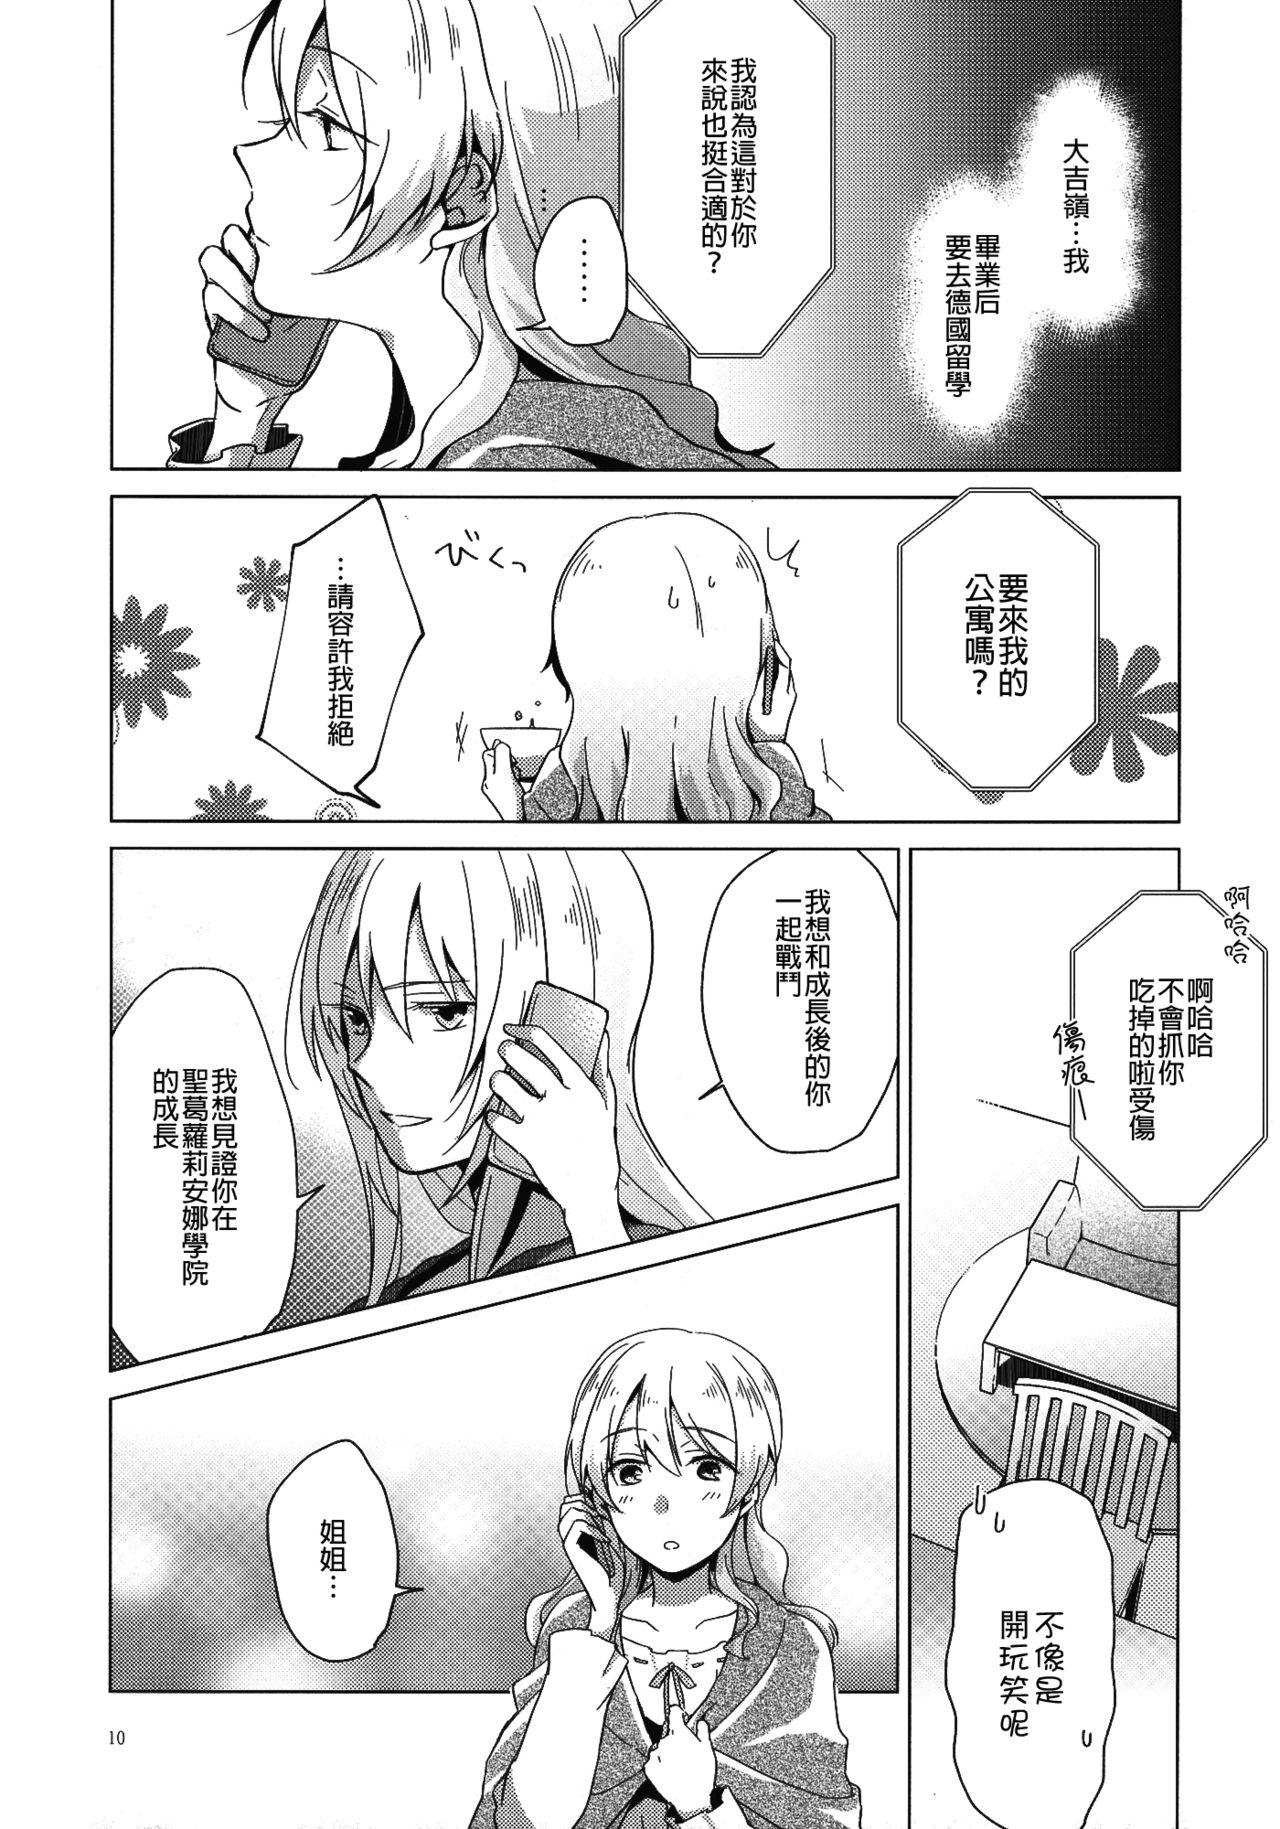 Cum Inside Over Time | 超時 - Girls und panzer Muscle - Page 10